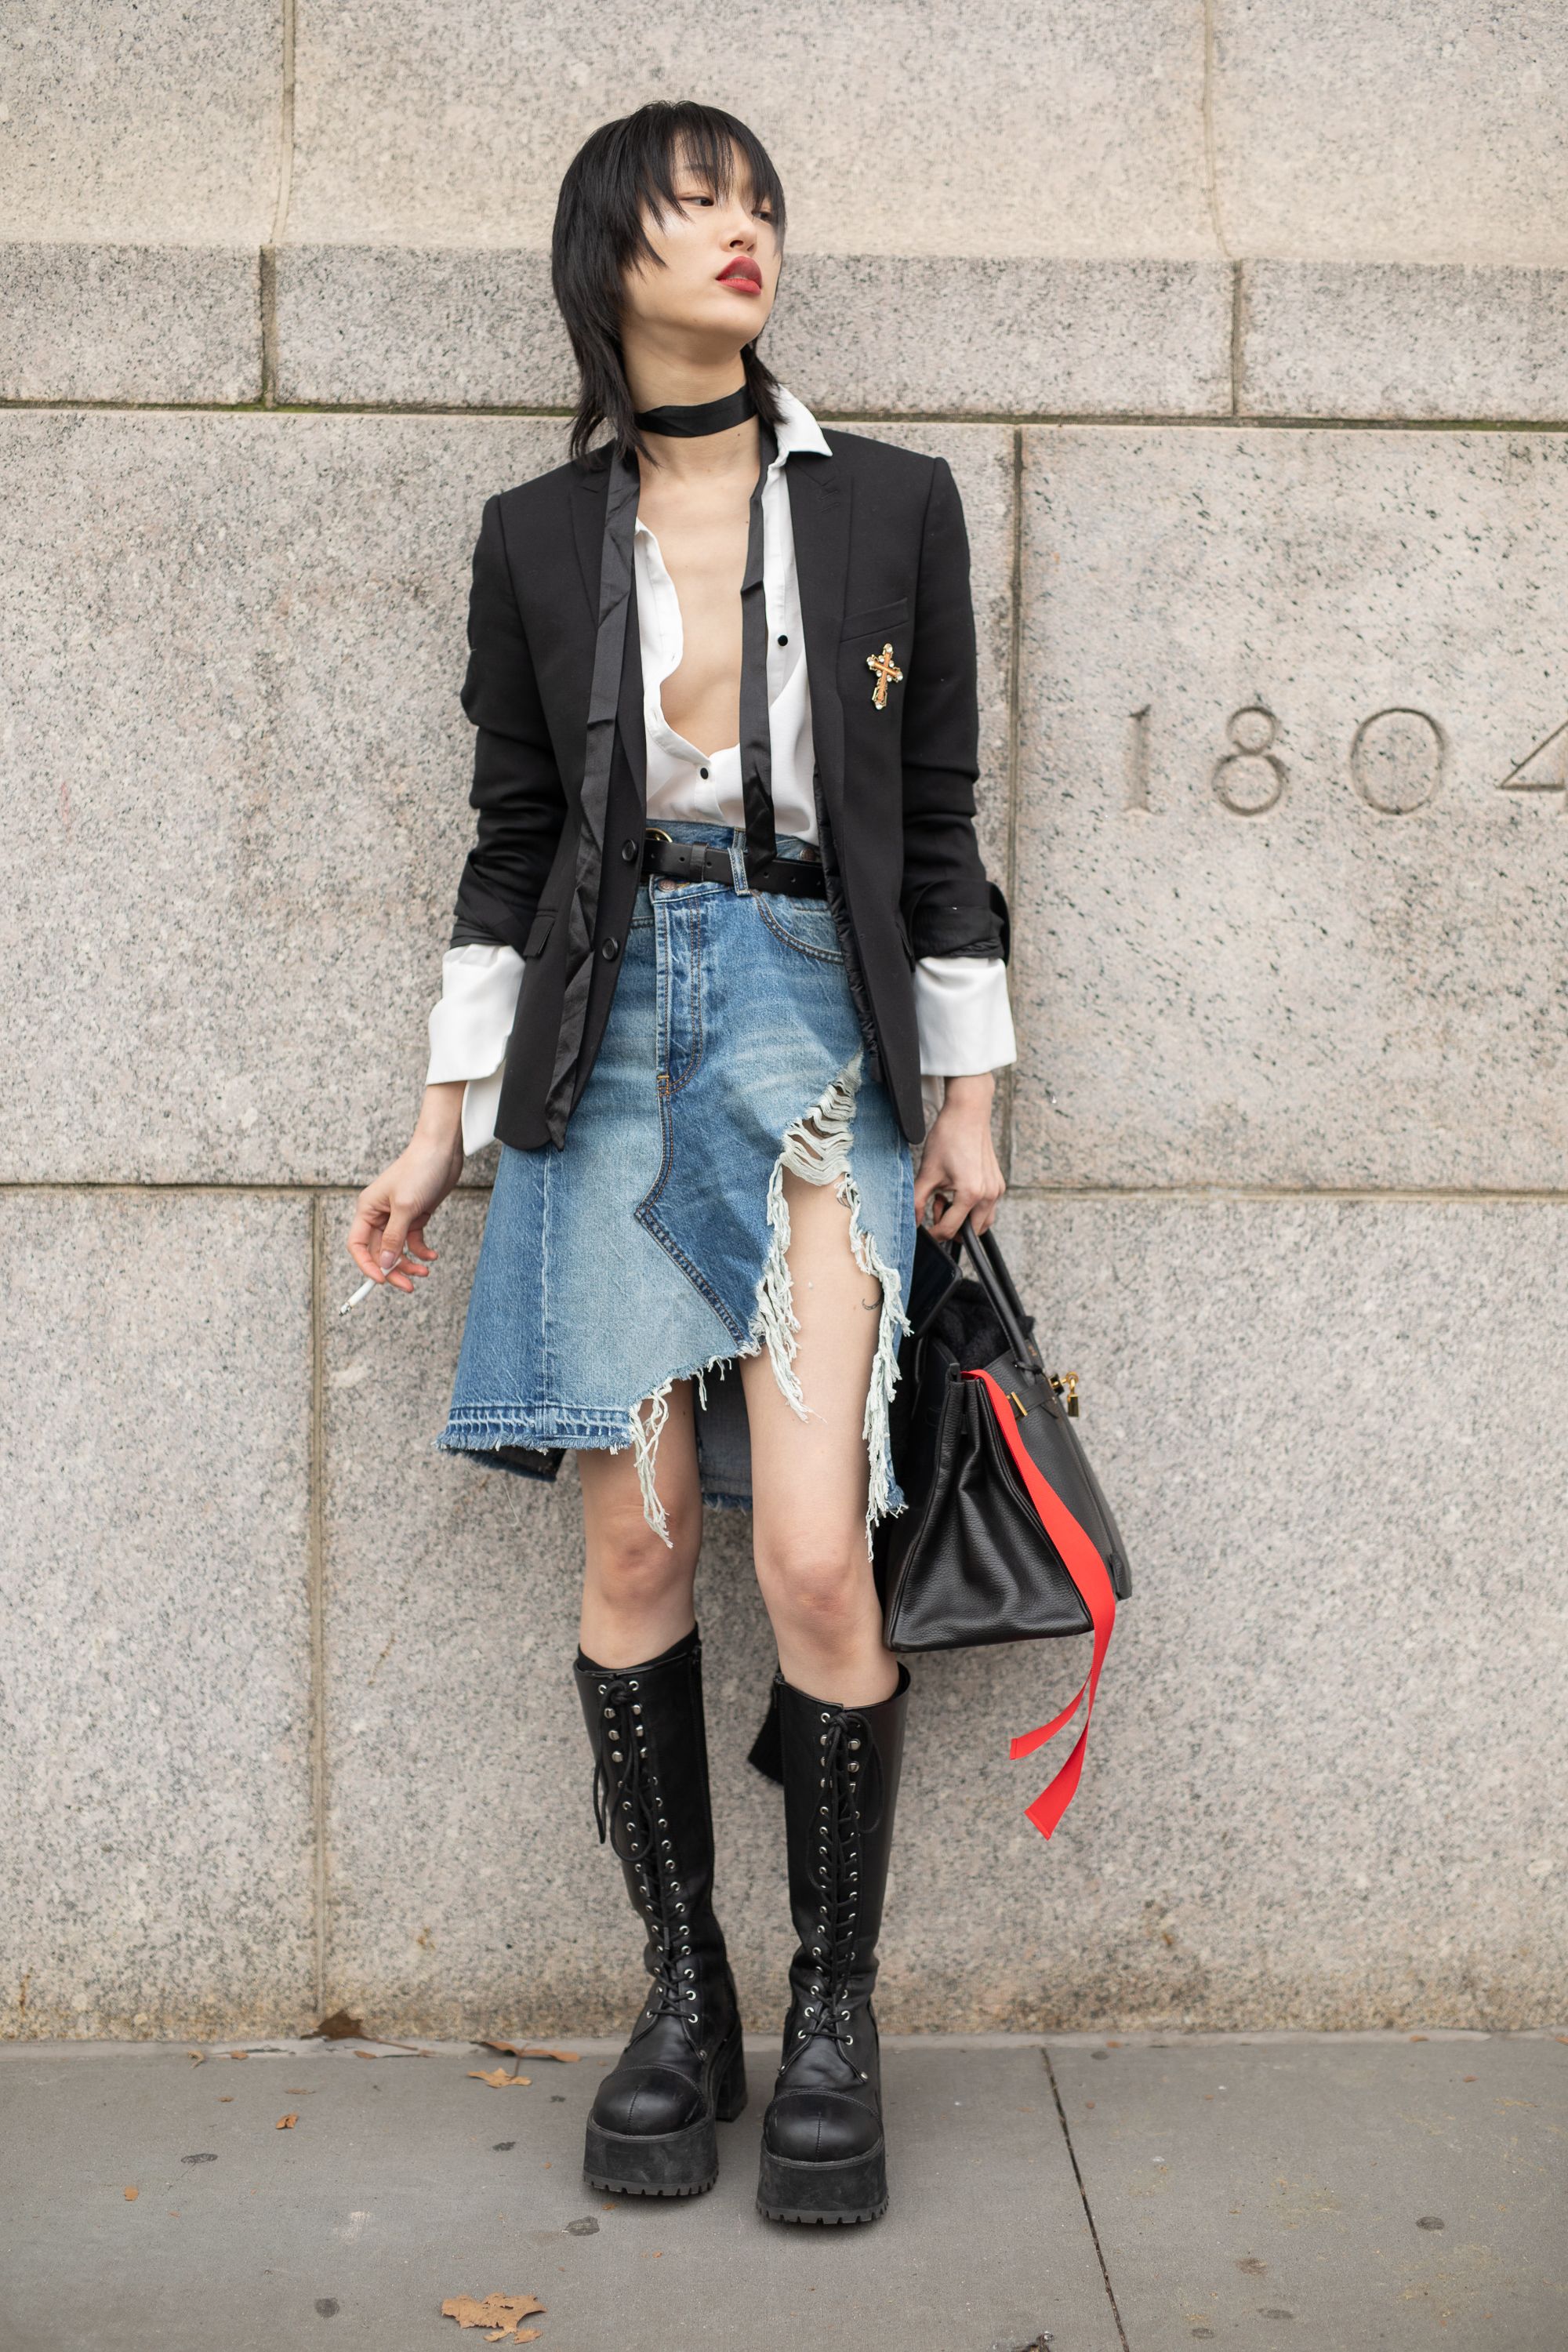 Denim Skirt Outfit Inspiration - How To Style Denim Skirts